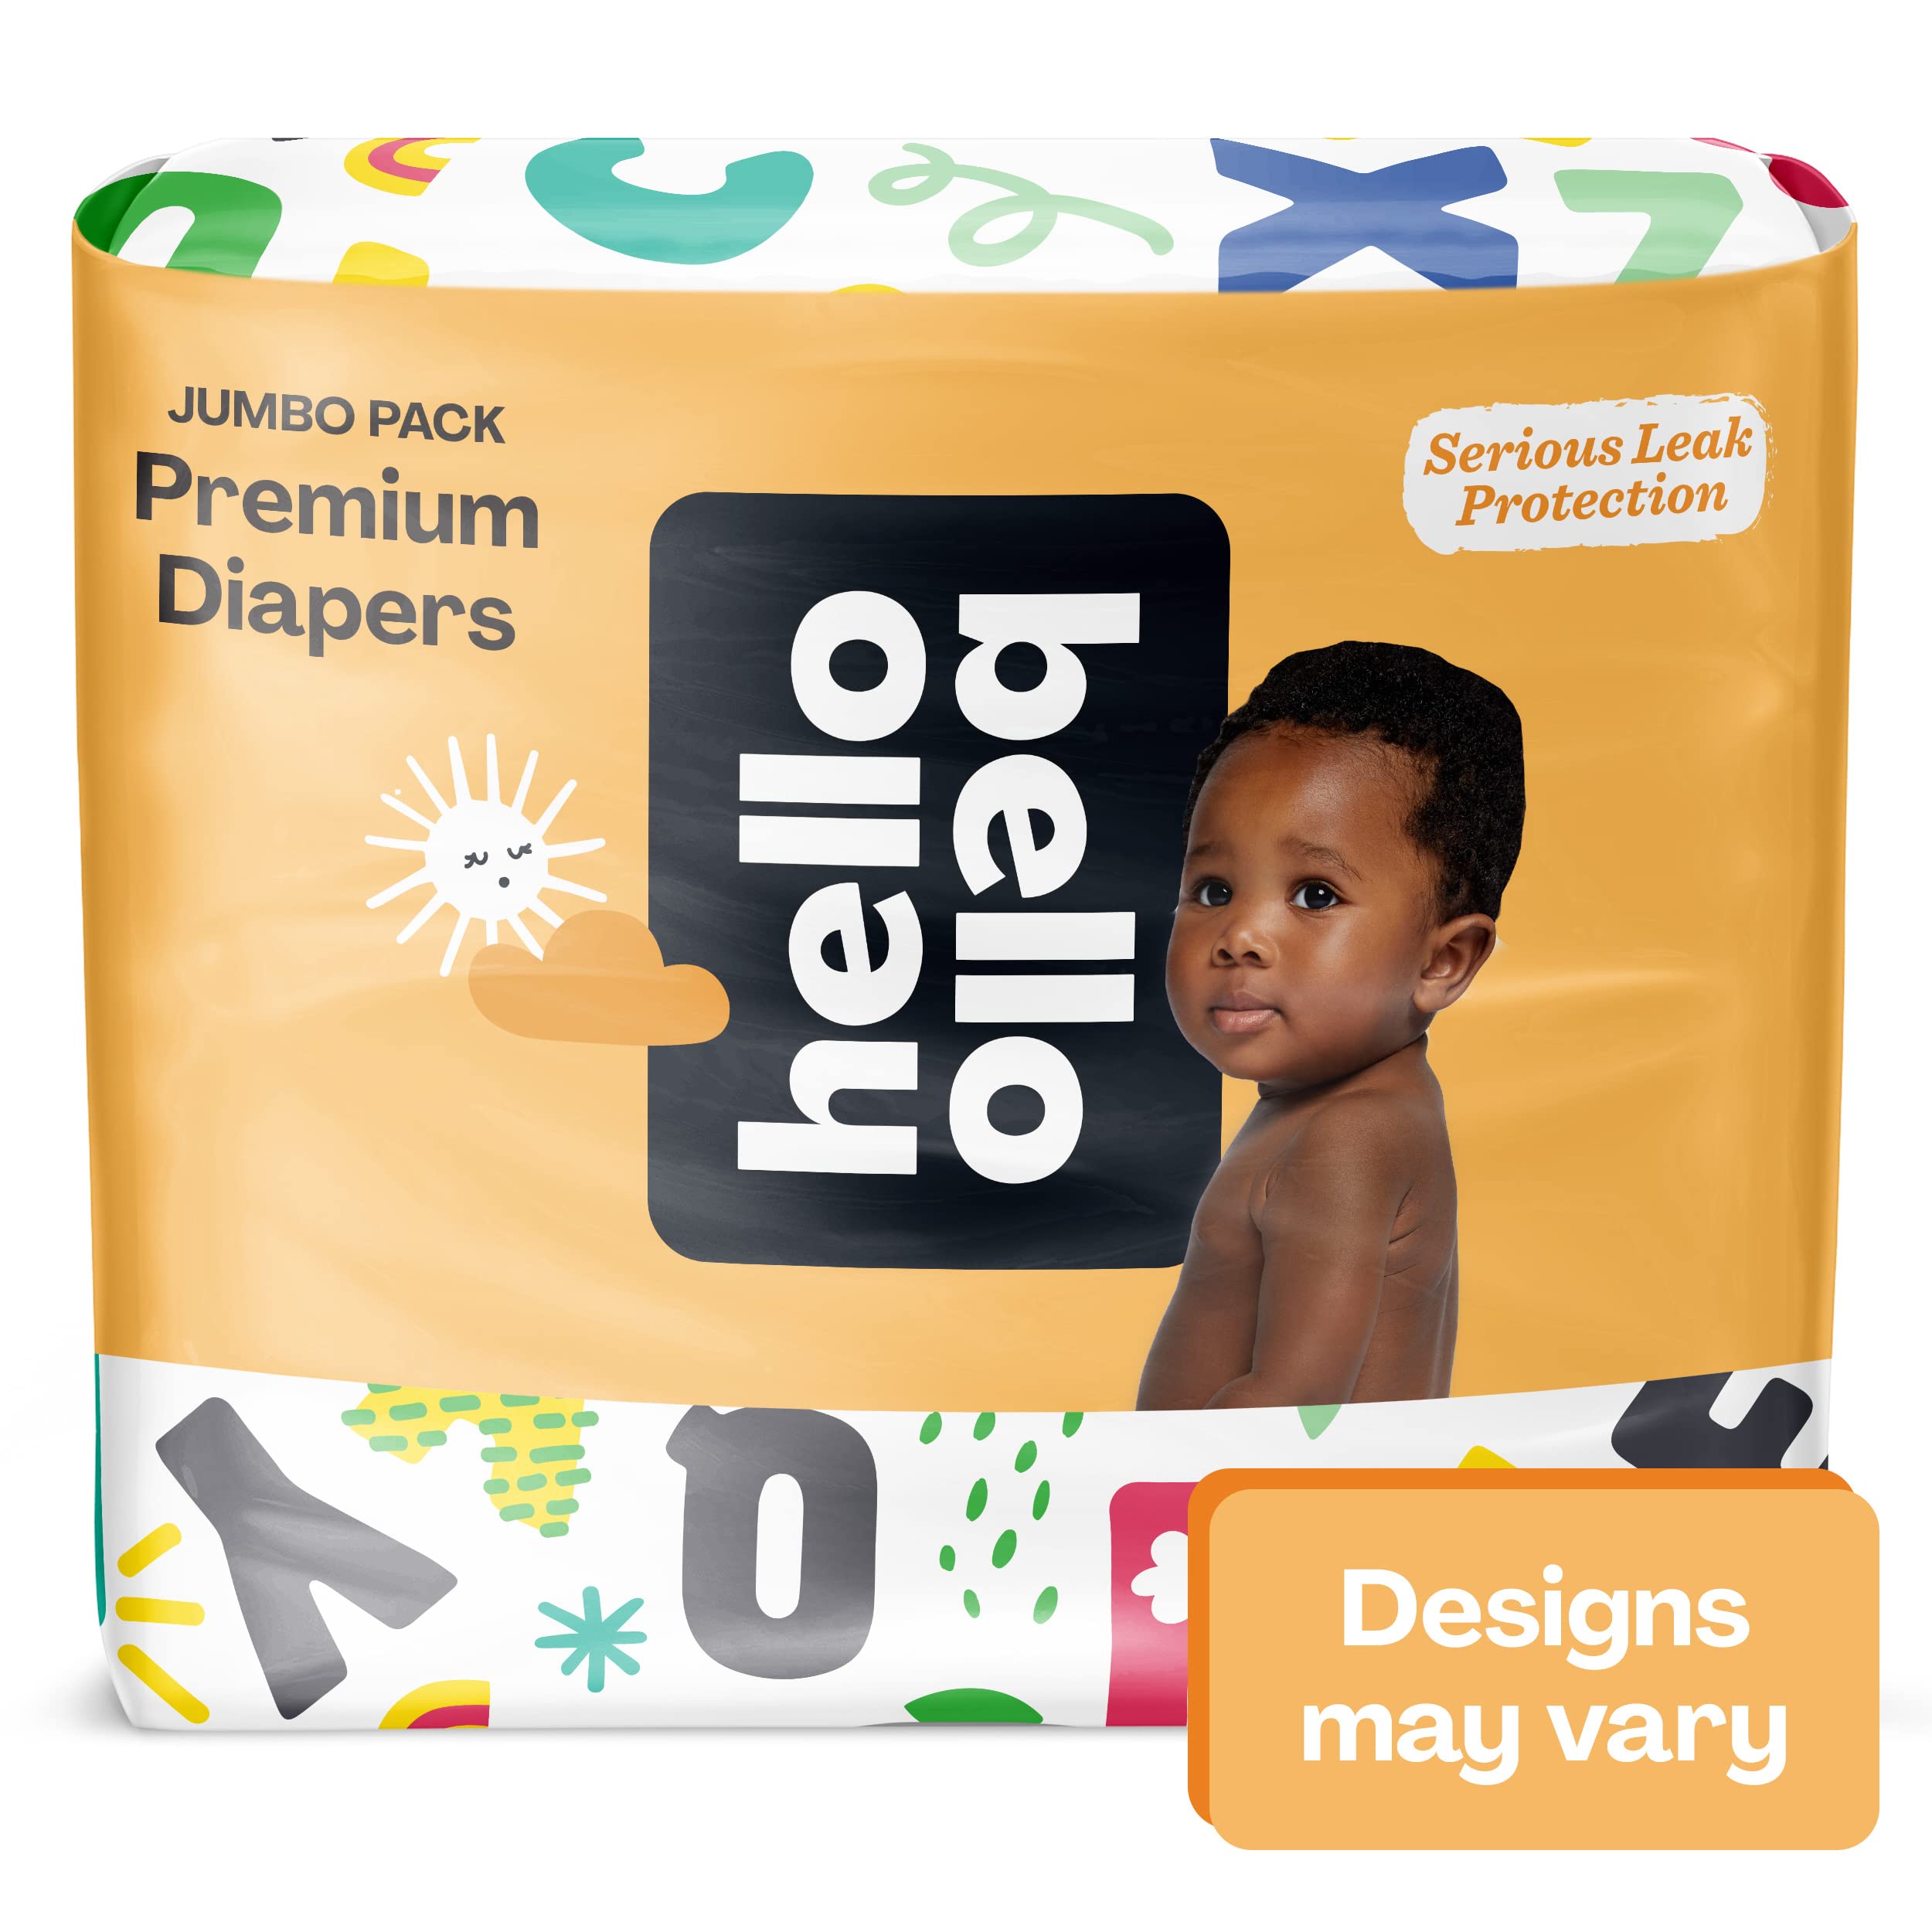 Hello Bello Premium Baby Diapers Size Newborn I 128 Count of Disposable, Extra-Absorbent, Hypoallergenic, and Eco-Friendly Baby Diapers with Snug and Comfort Fit I Surprise Girl Patterns